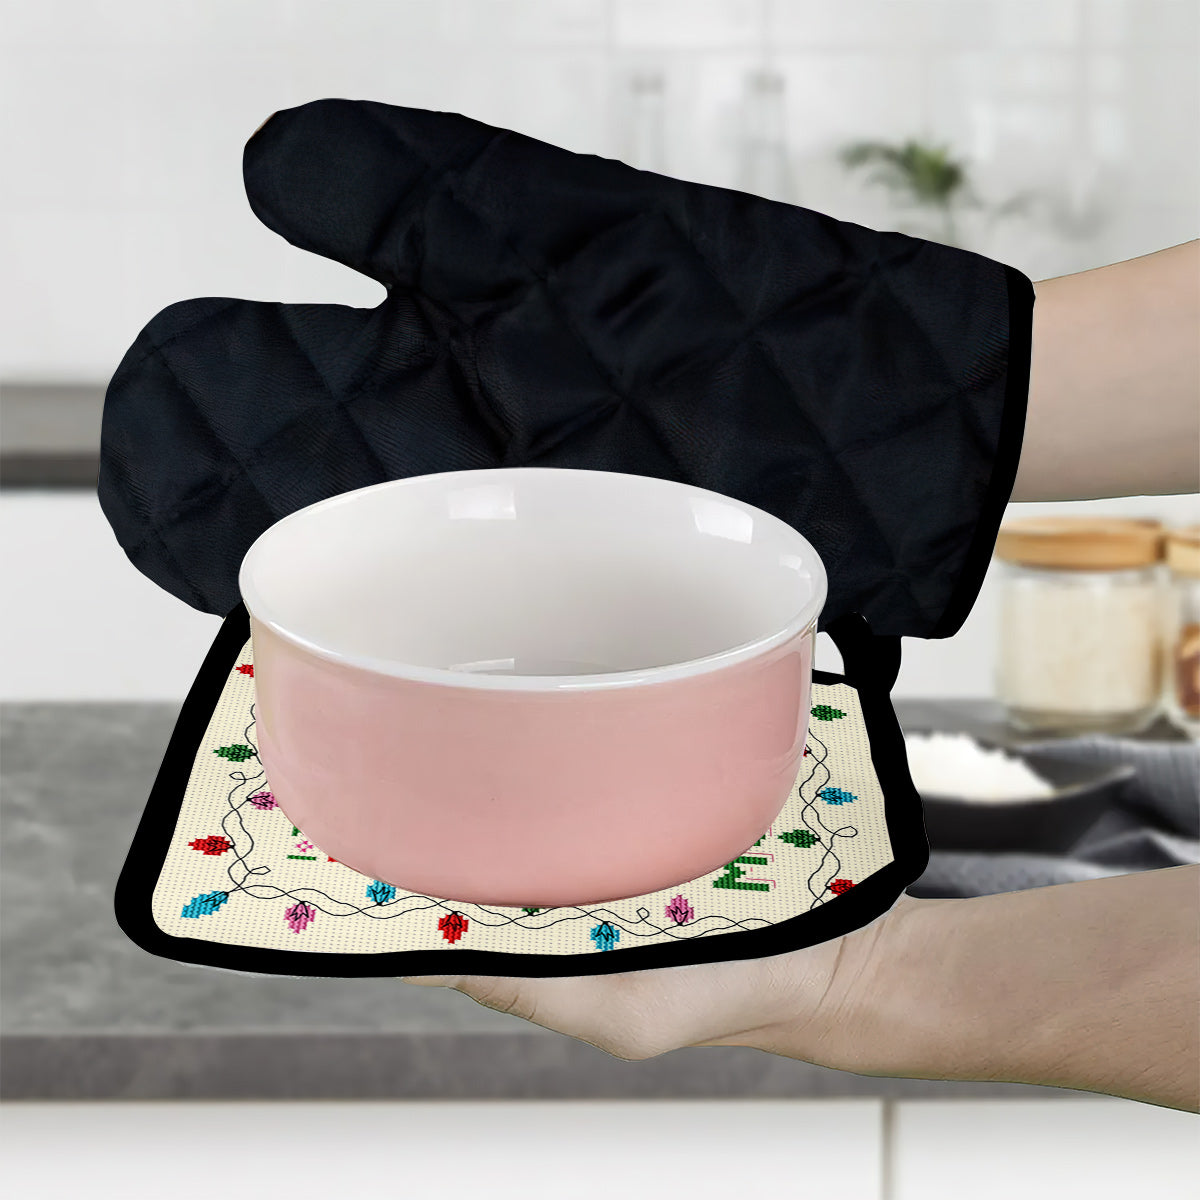 I Just Want To Bake And Watch Christmas Movies - Personalized Baking Oven Mitts & Pot Holder Set